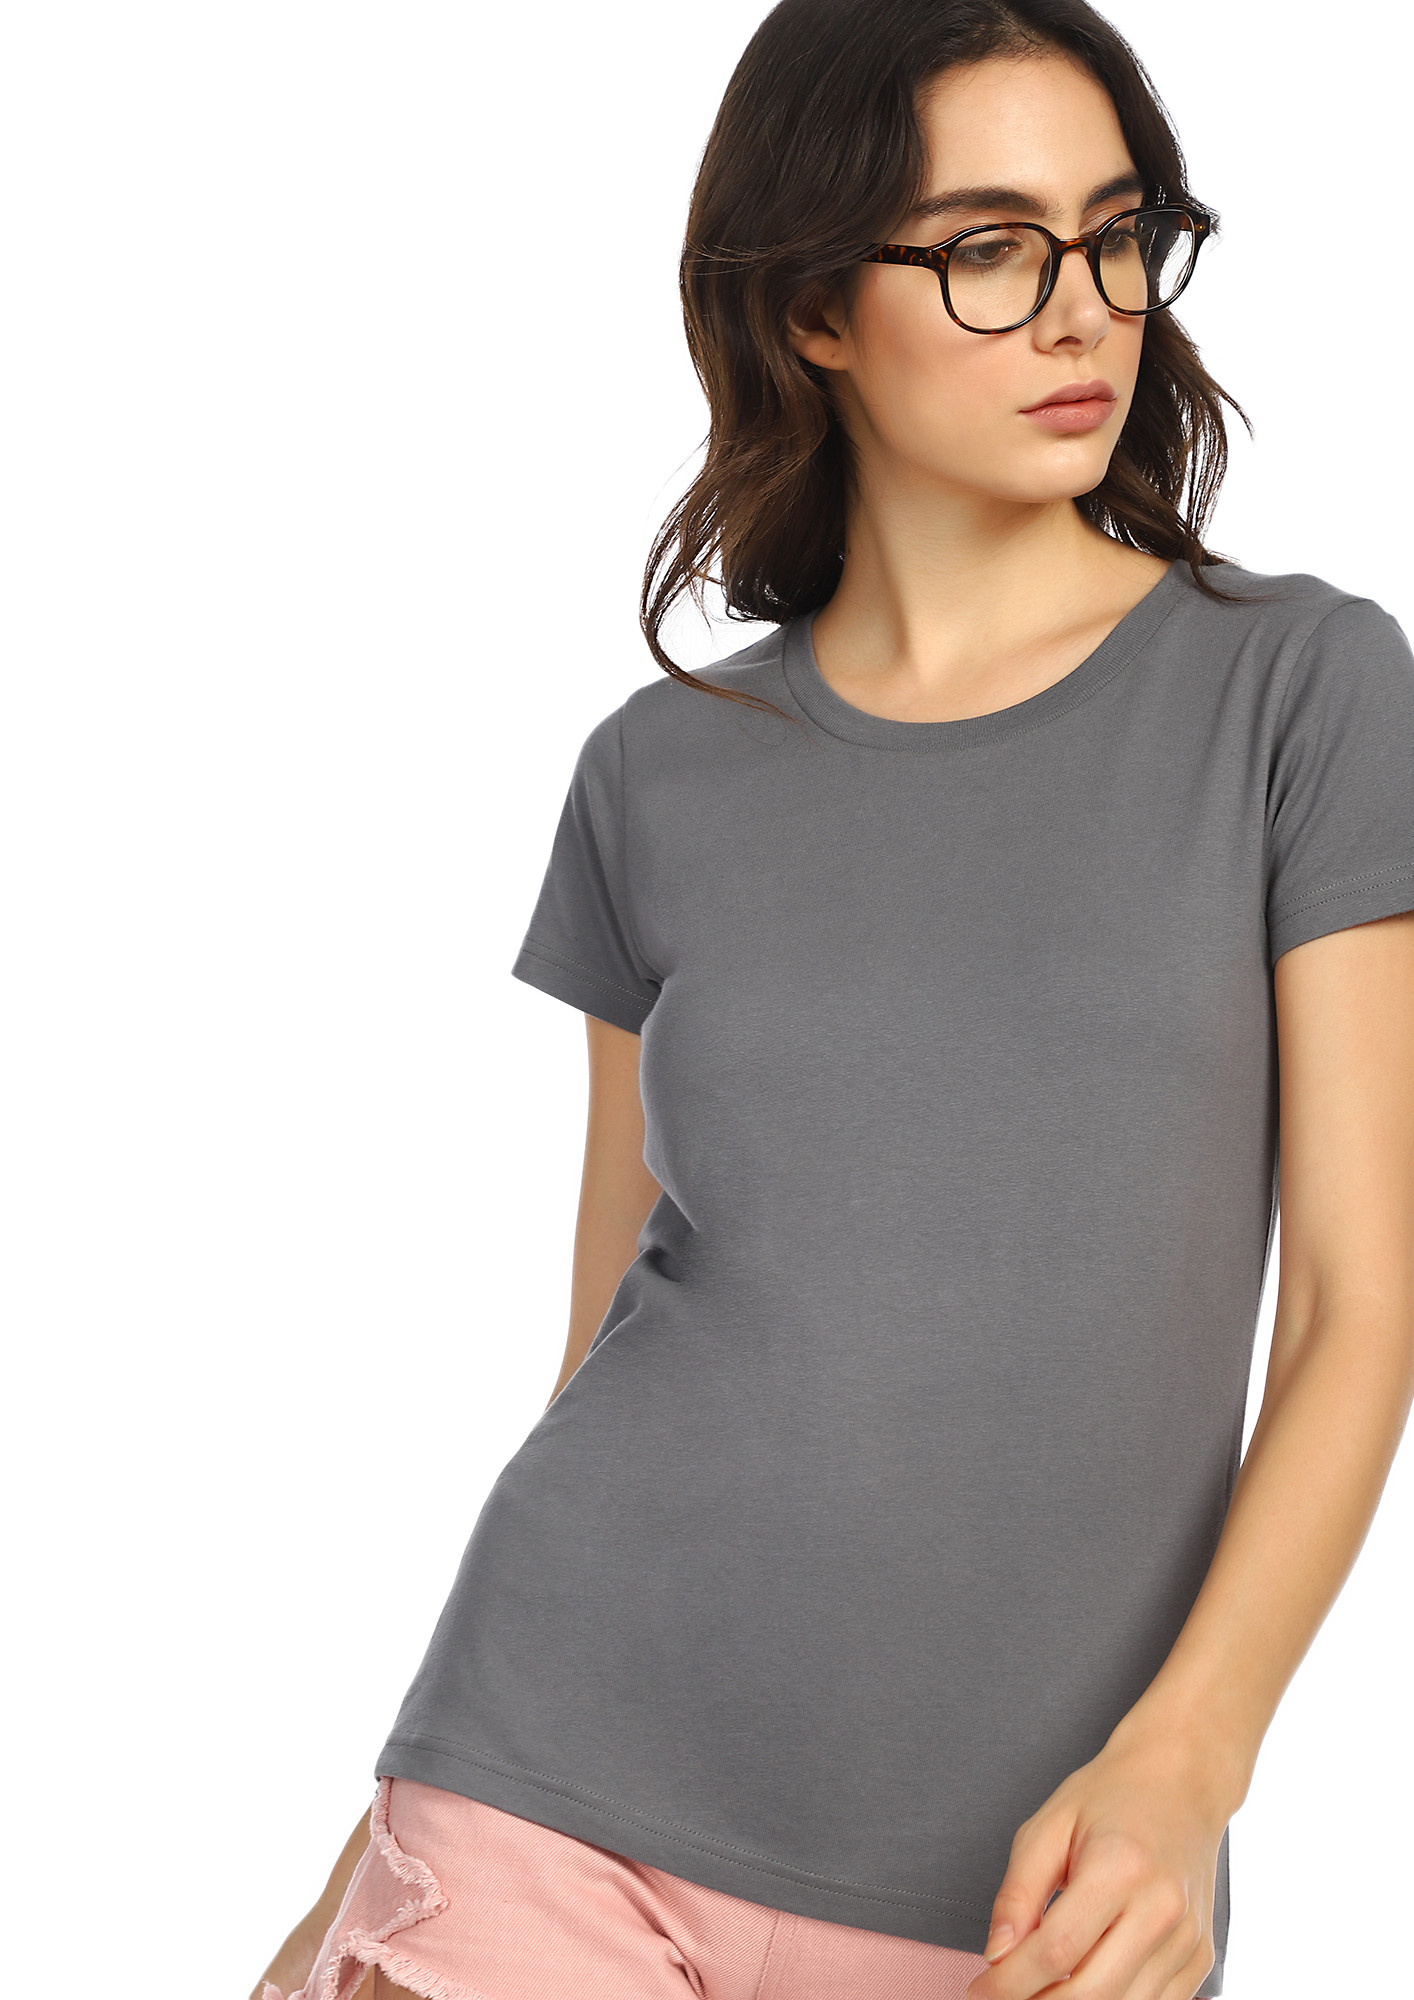 MUST HAVE GREY T-SHIRT